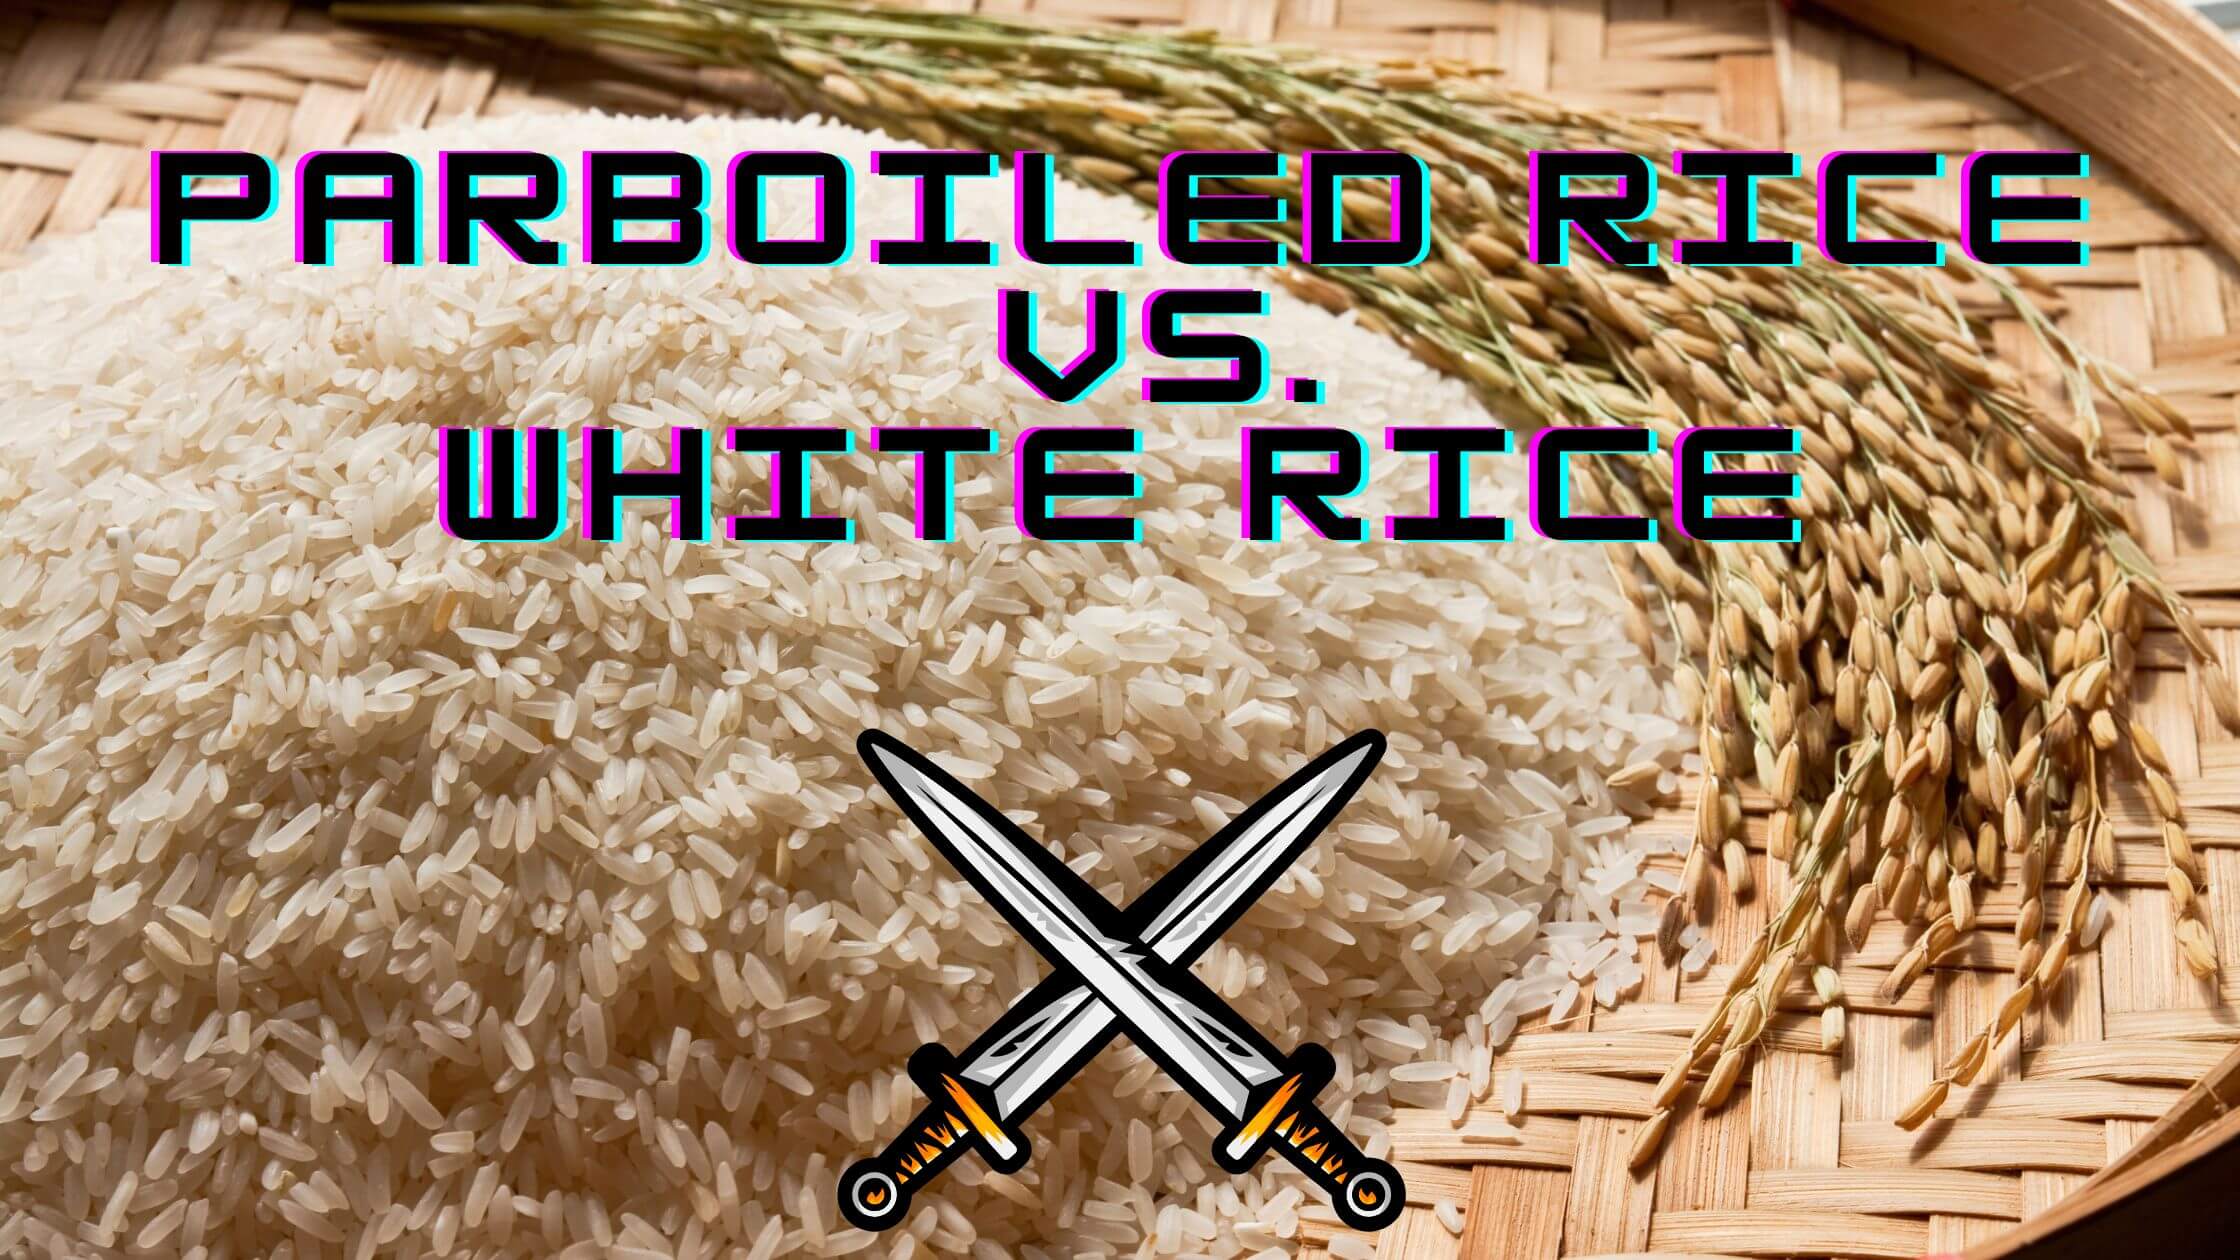 Parboiled Rice and White Rice comparison